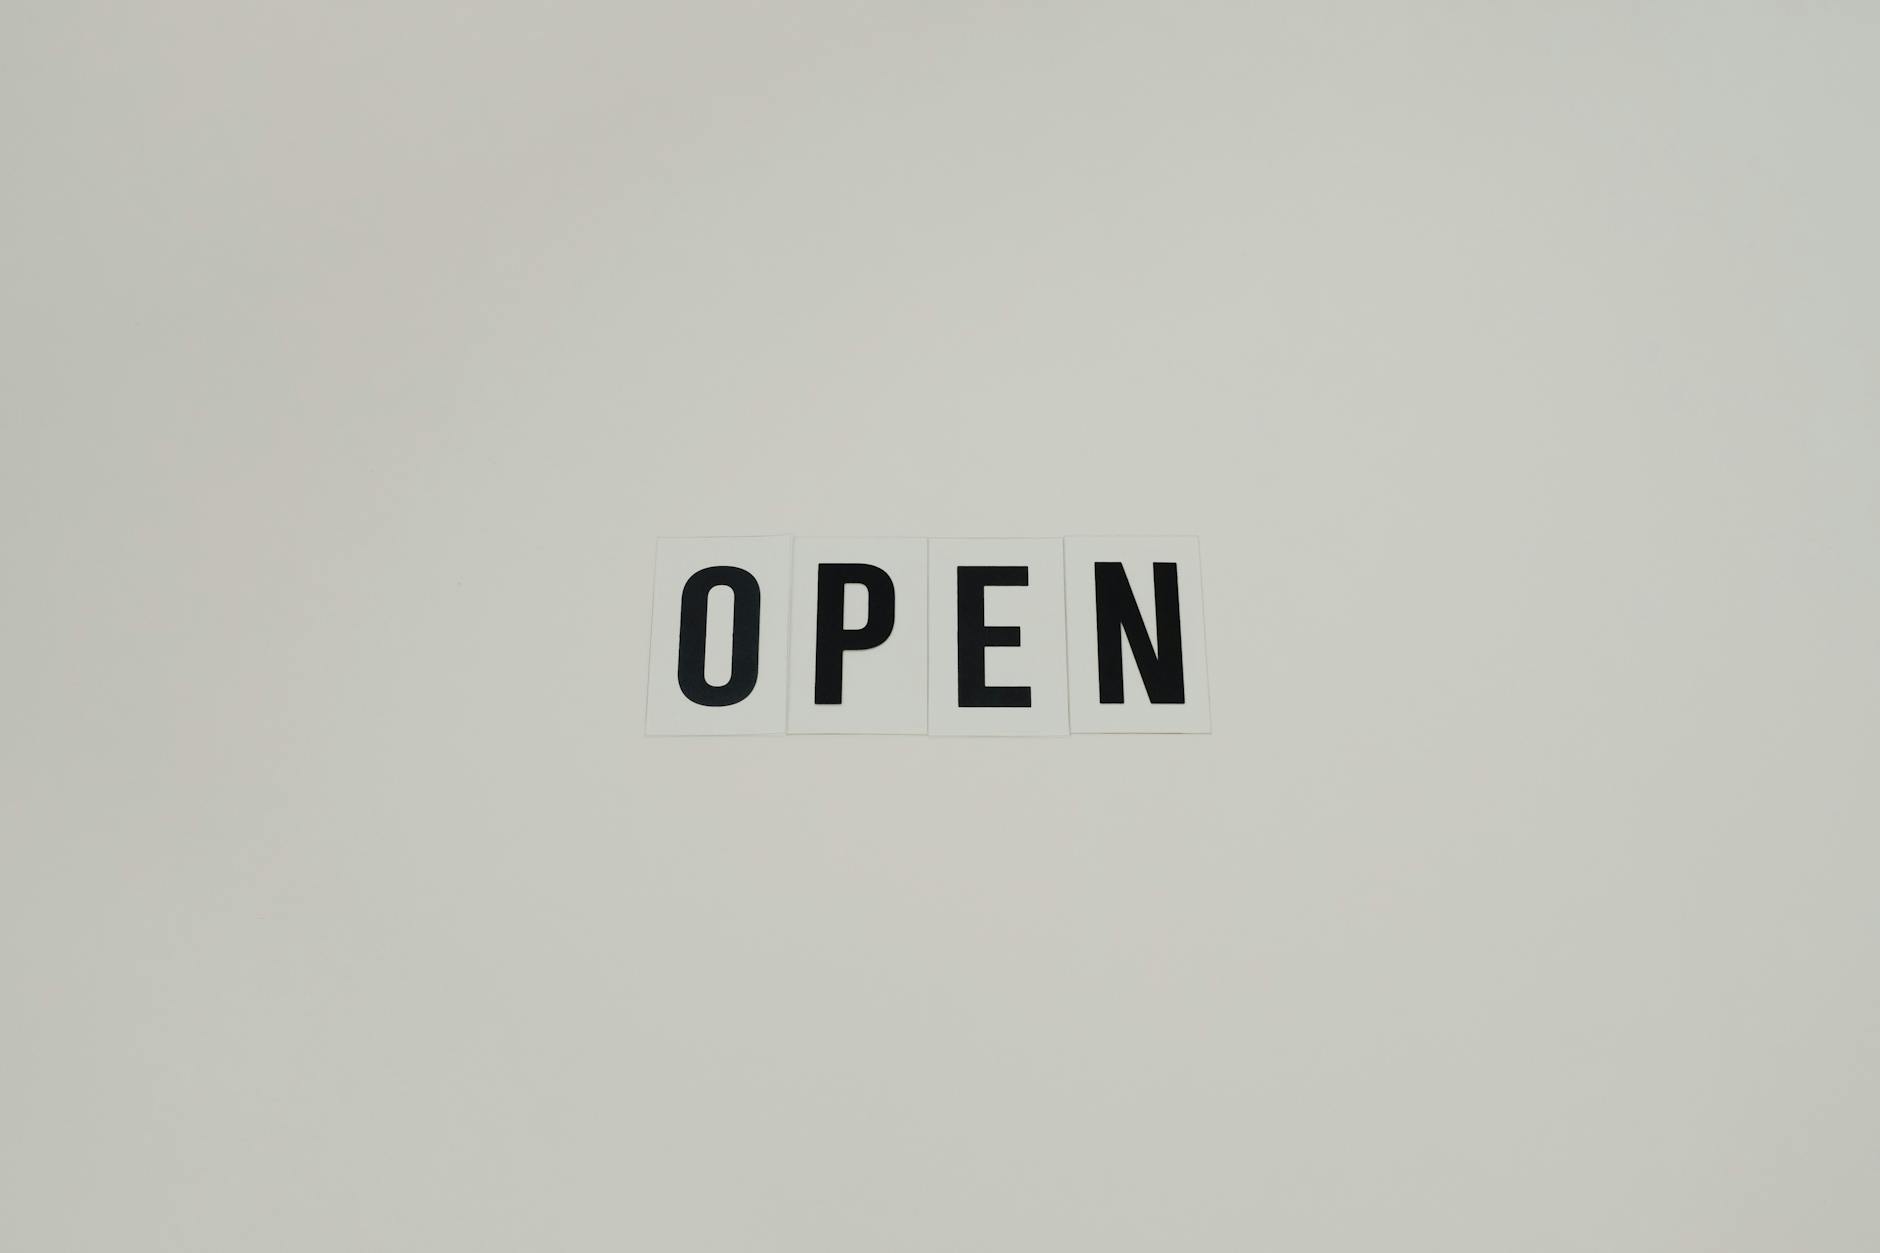 A rectangular white sign with text that says "OPEN"